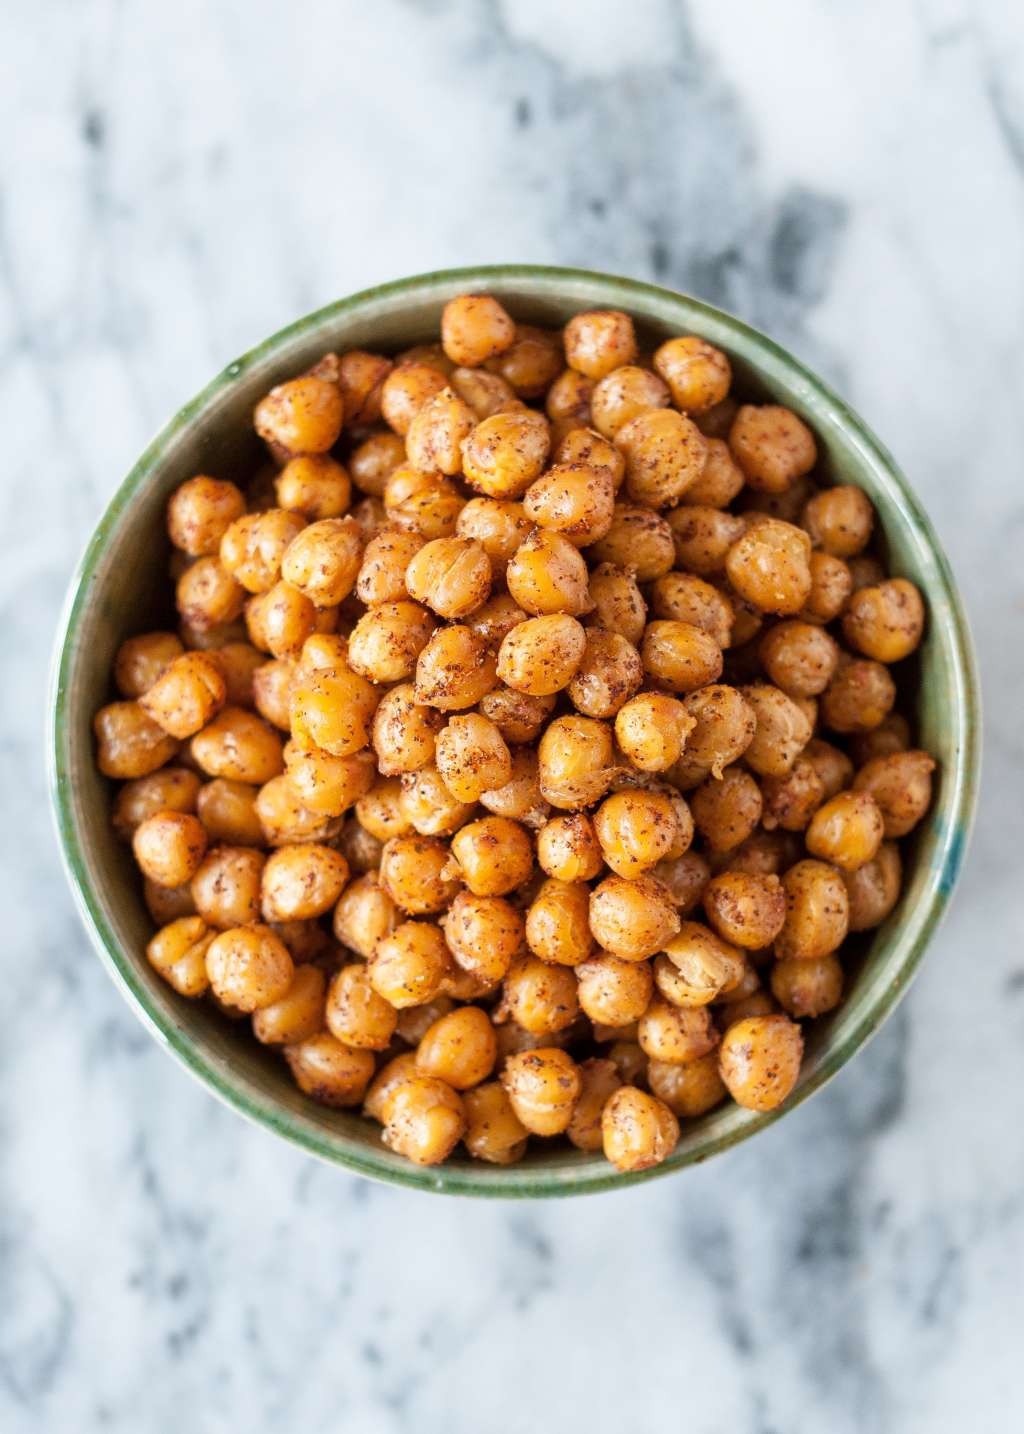 Baked Chickpea Recipes
 How To Make Crispy Roasted Chickpeas in the Oven